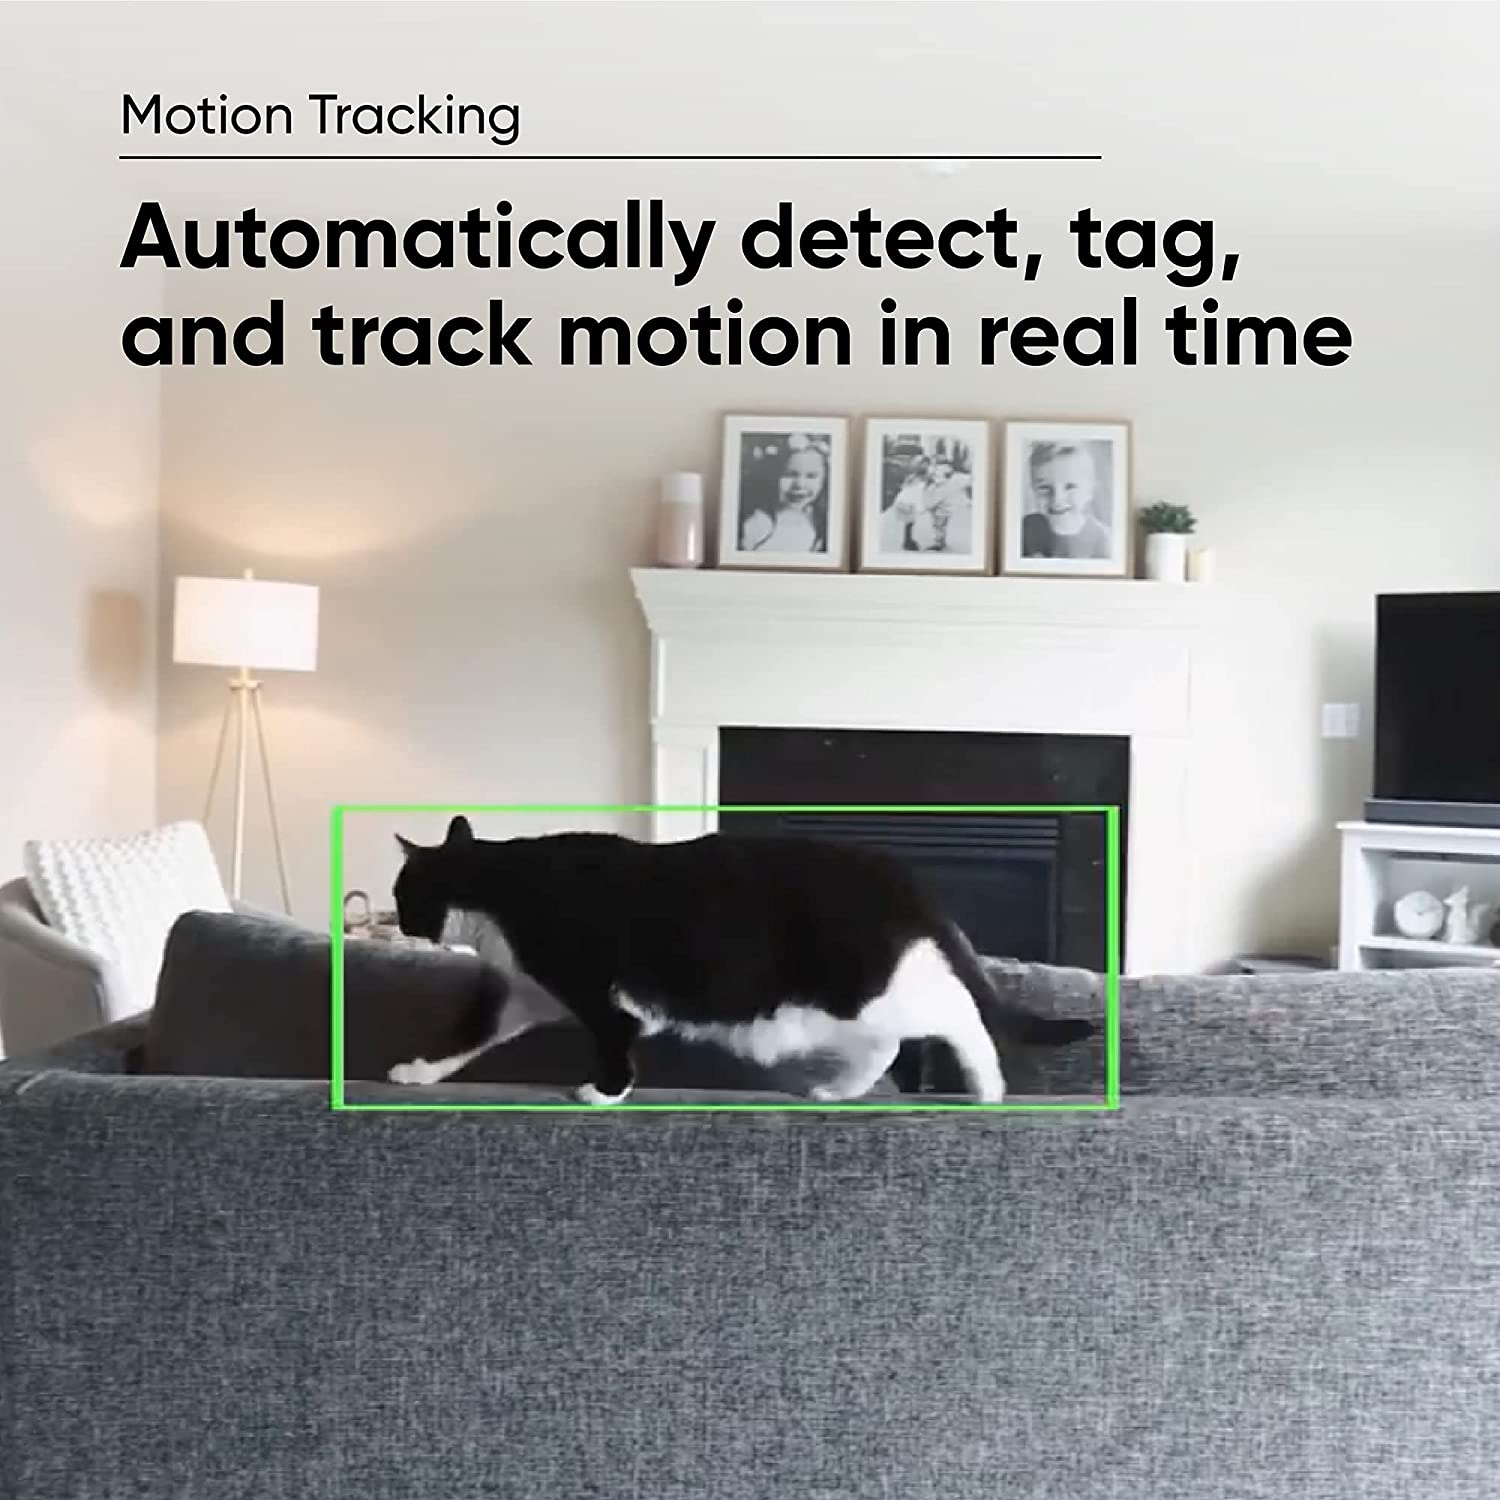 Cat walking across couch with motion detection box around it. Text overlay "Motion Tracking."